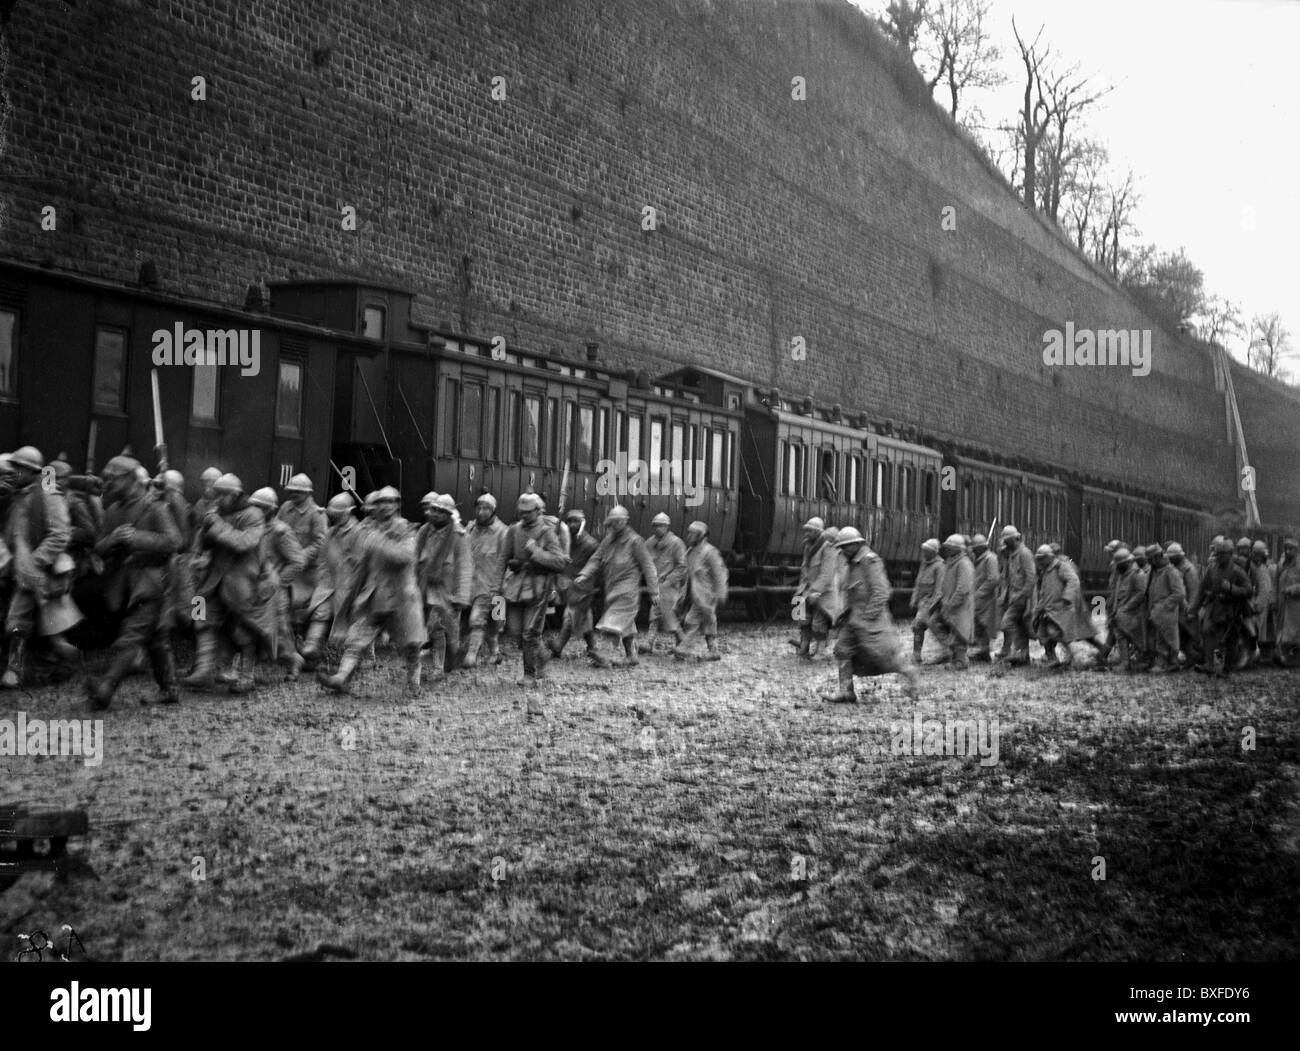 events, First World War / WWI, Western Front 1915 - 1918, German soldiers with French prisoners of war at a railway station, France, circa 1915/1916, 20th century, historic, historical, 1910s, 10s, Germany, military, German Reich, Empire, uniform, uniforms, captivity, POW, POWs, guard, pickelhaube, spiked helmet, rifle, bayonet, train, people, Additional-Rights-Clearences-Not Available Stock Photo